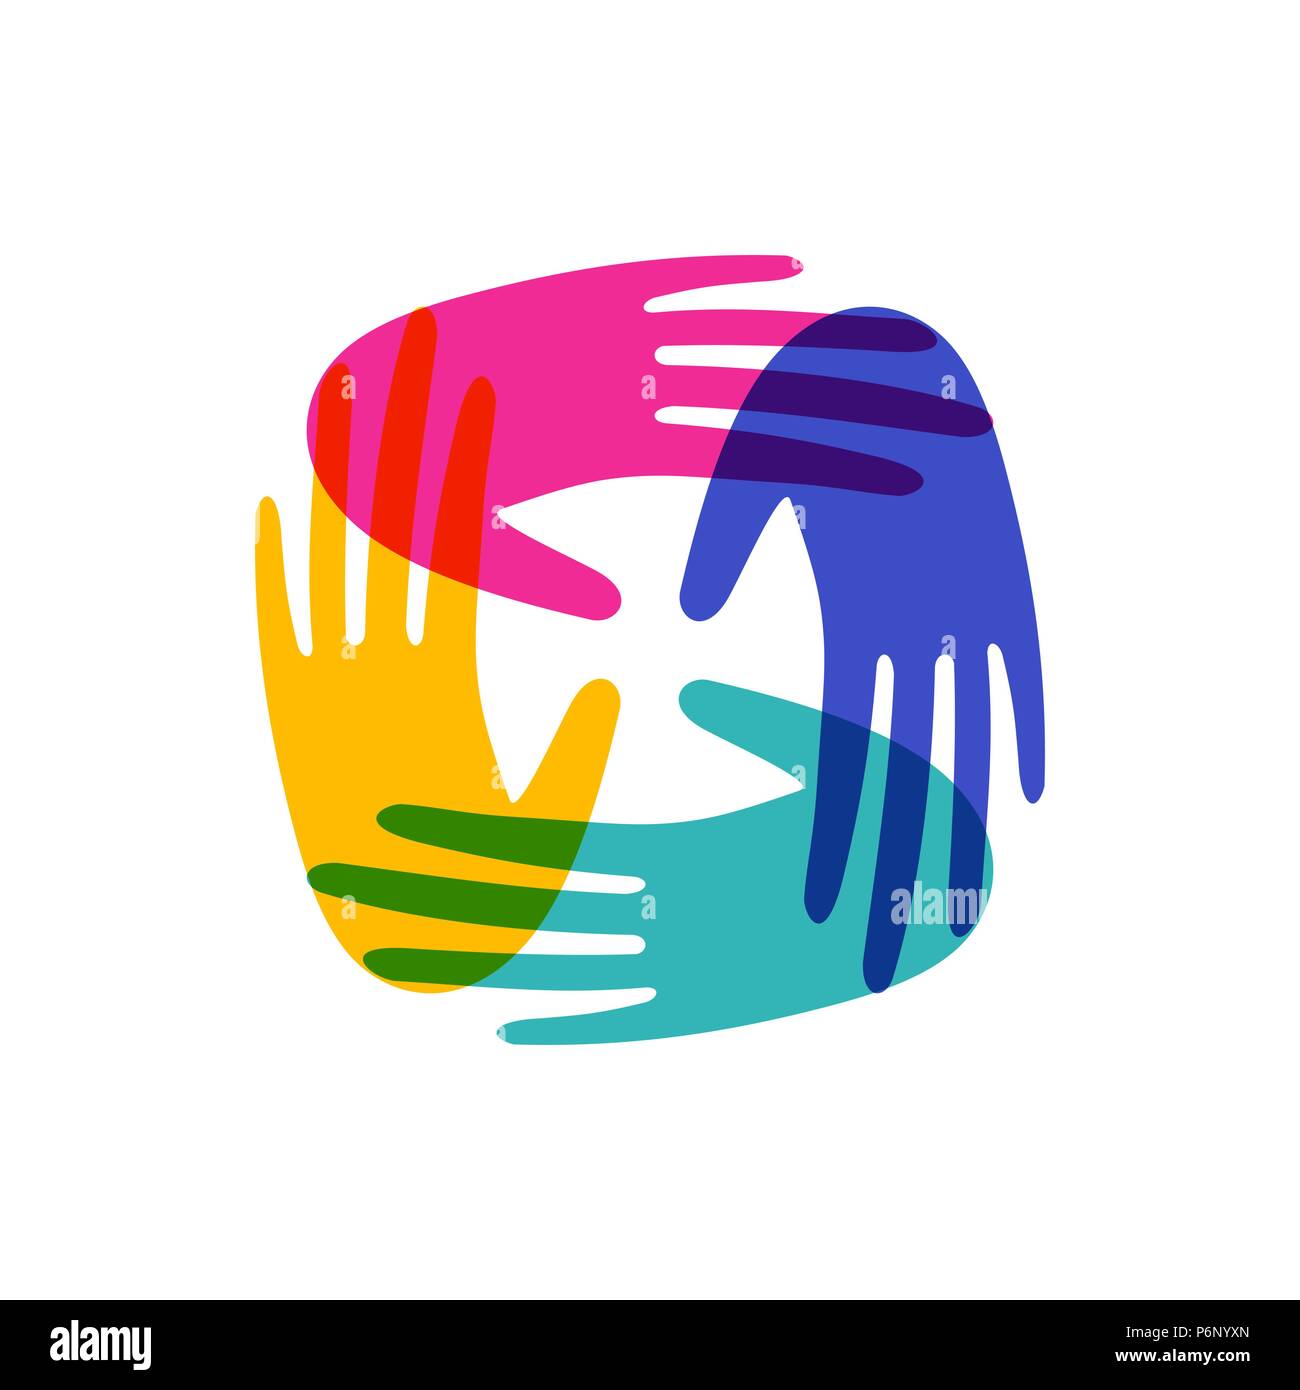 Colorful human hands together. Community team concept illustration for culture diversity or teamwork project. EPS10 vector. Stock Vector